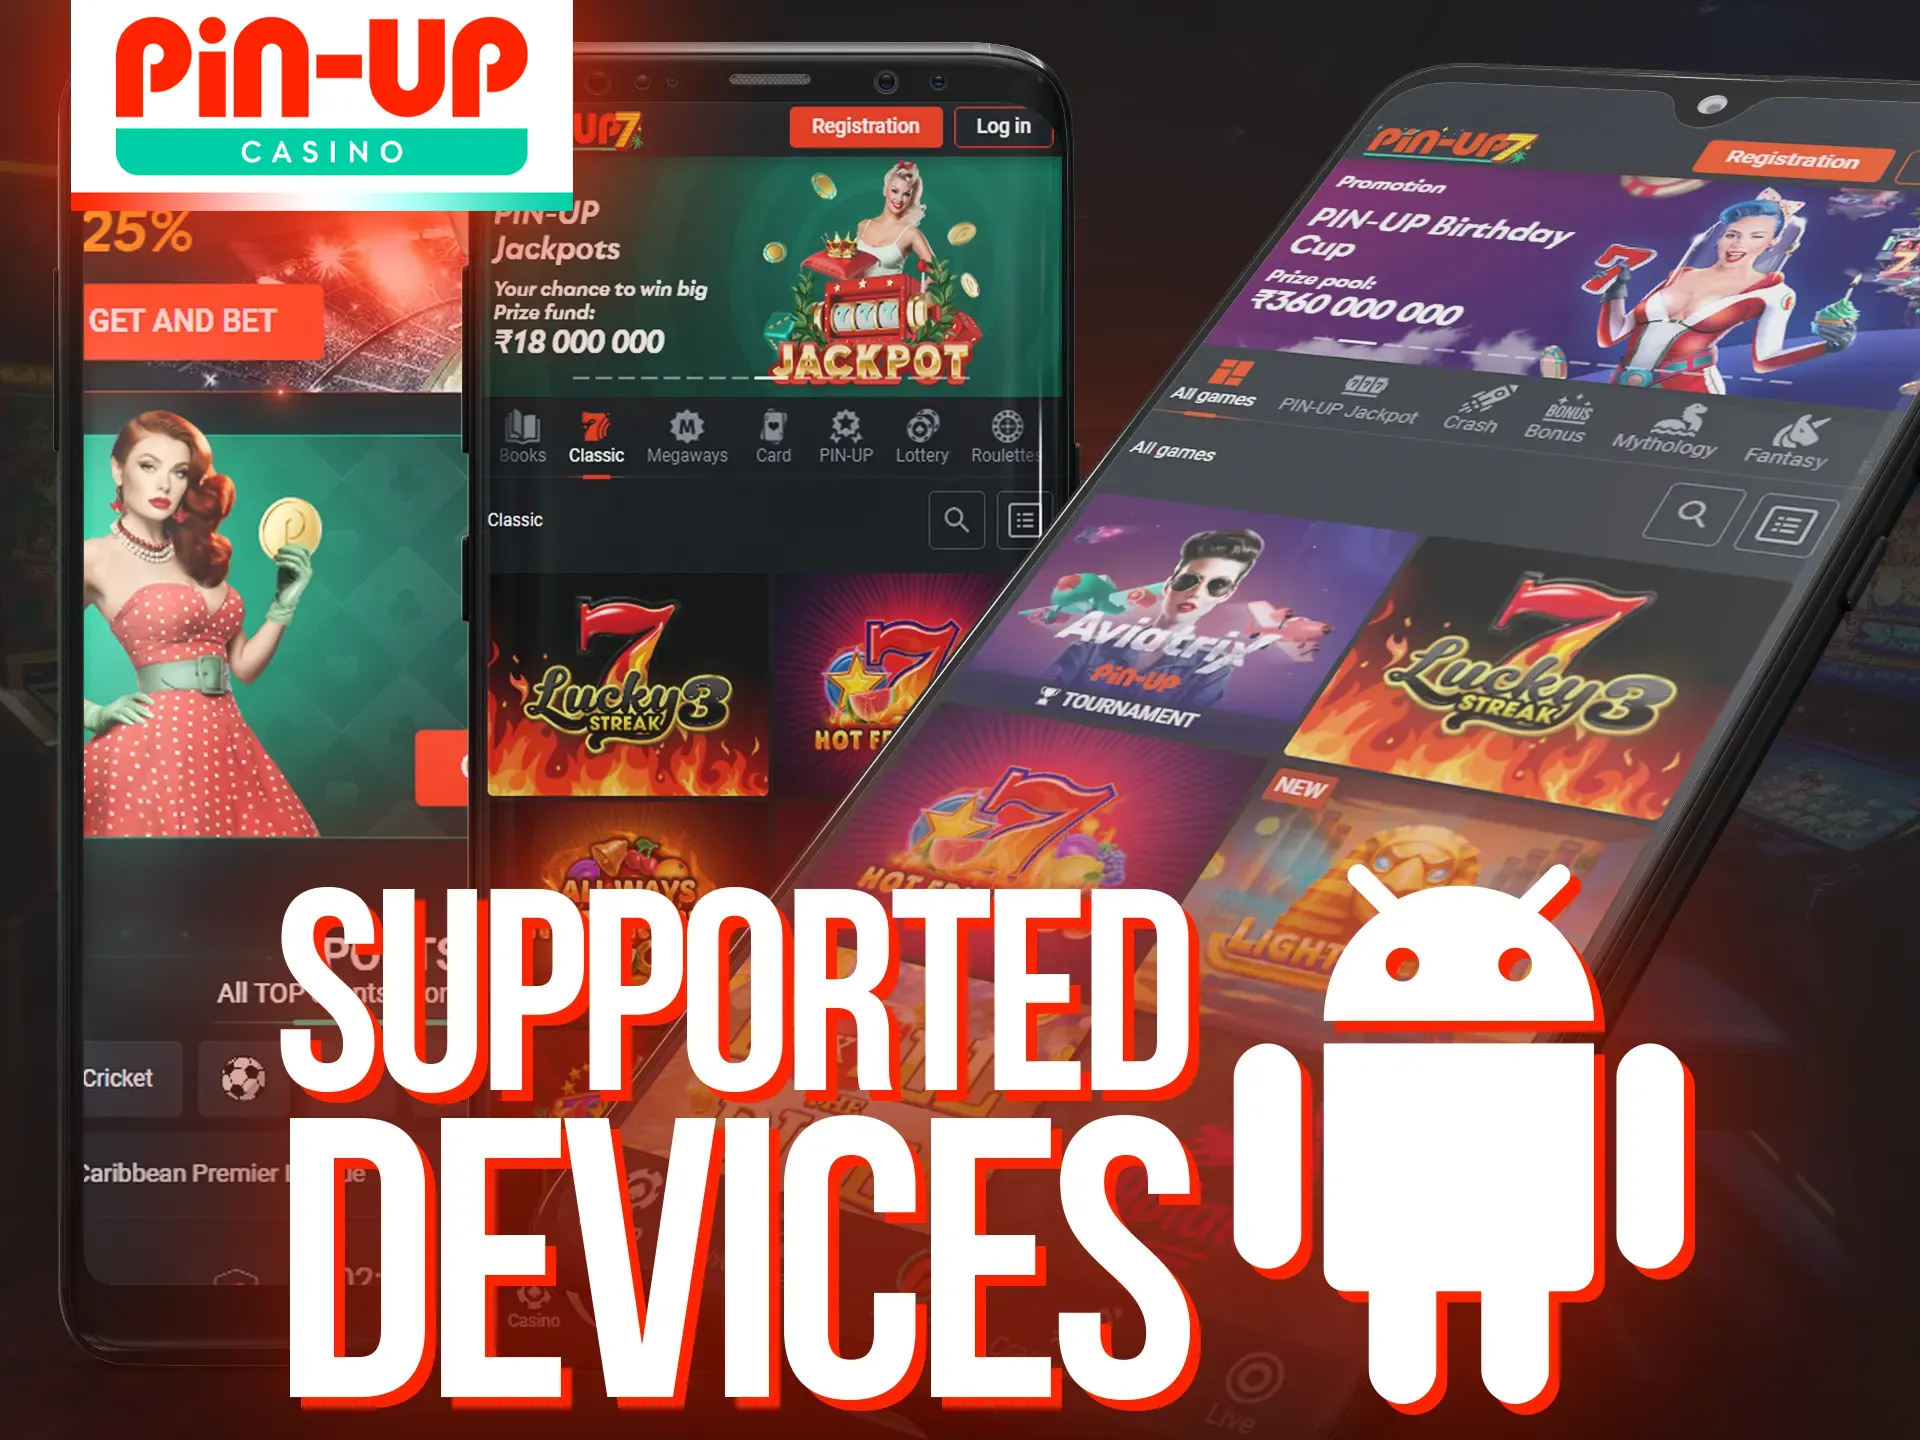 Play at Pin-Up online casino from your Android device.